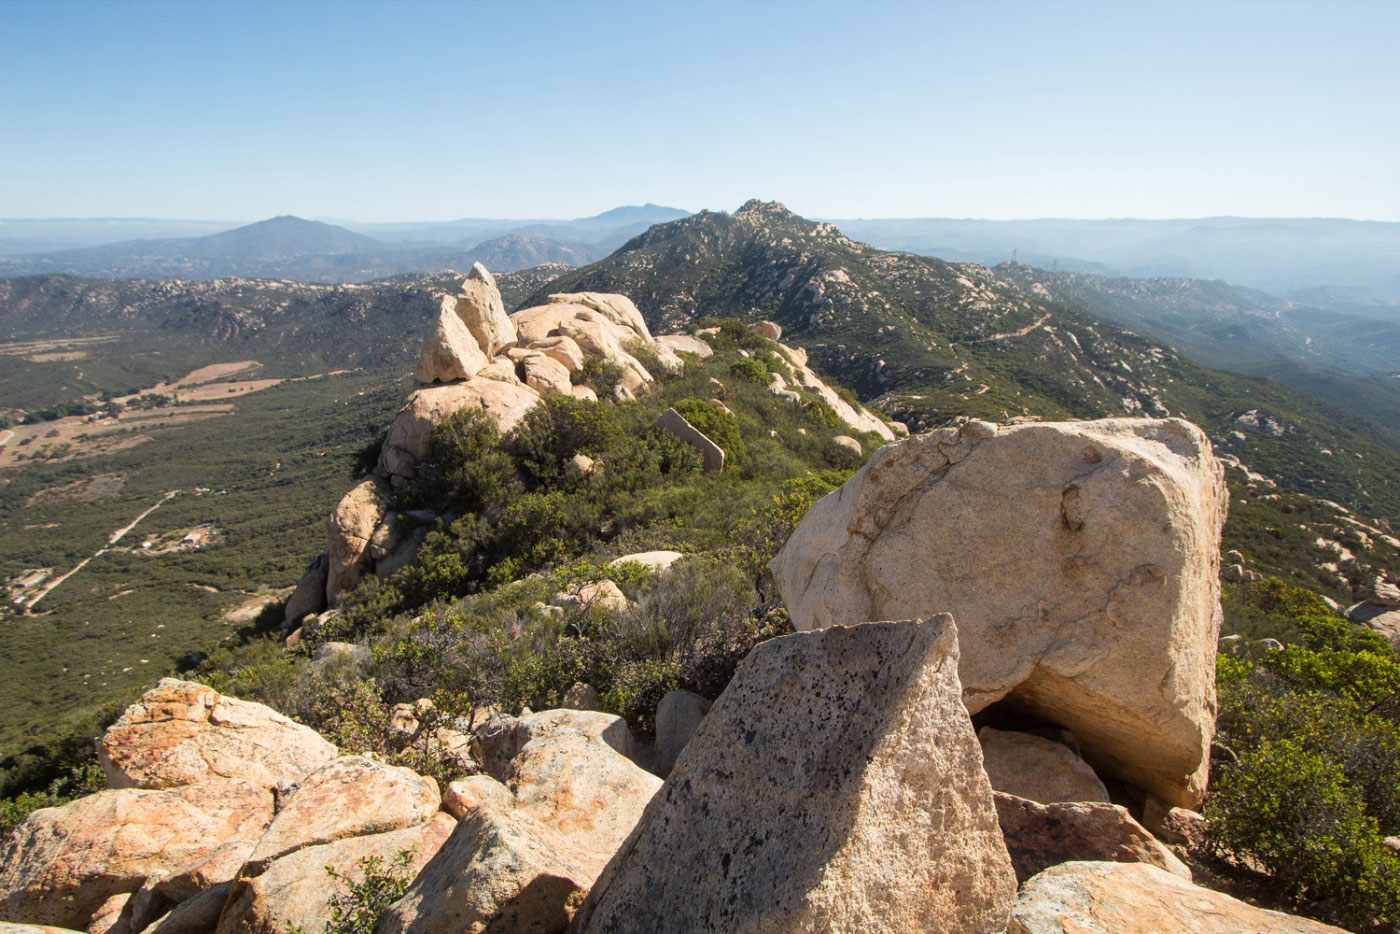 Hike Lawson Peak and Gaskill Peak in Cleveland National Forest, California - Stav is Lost